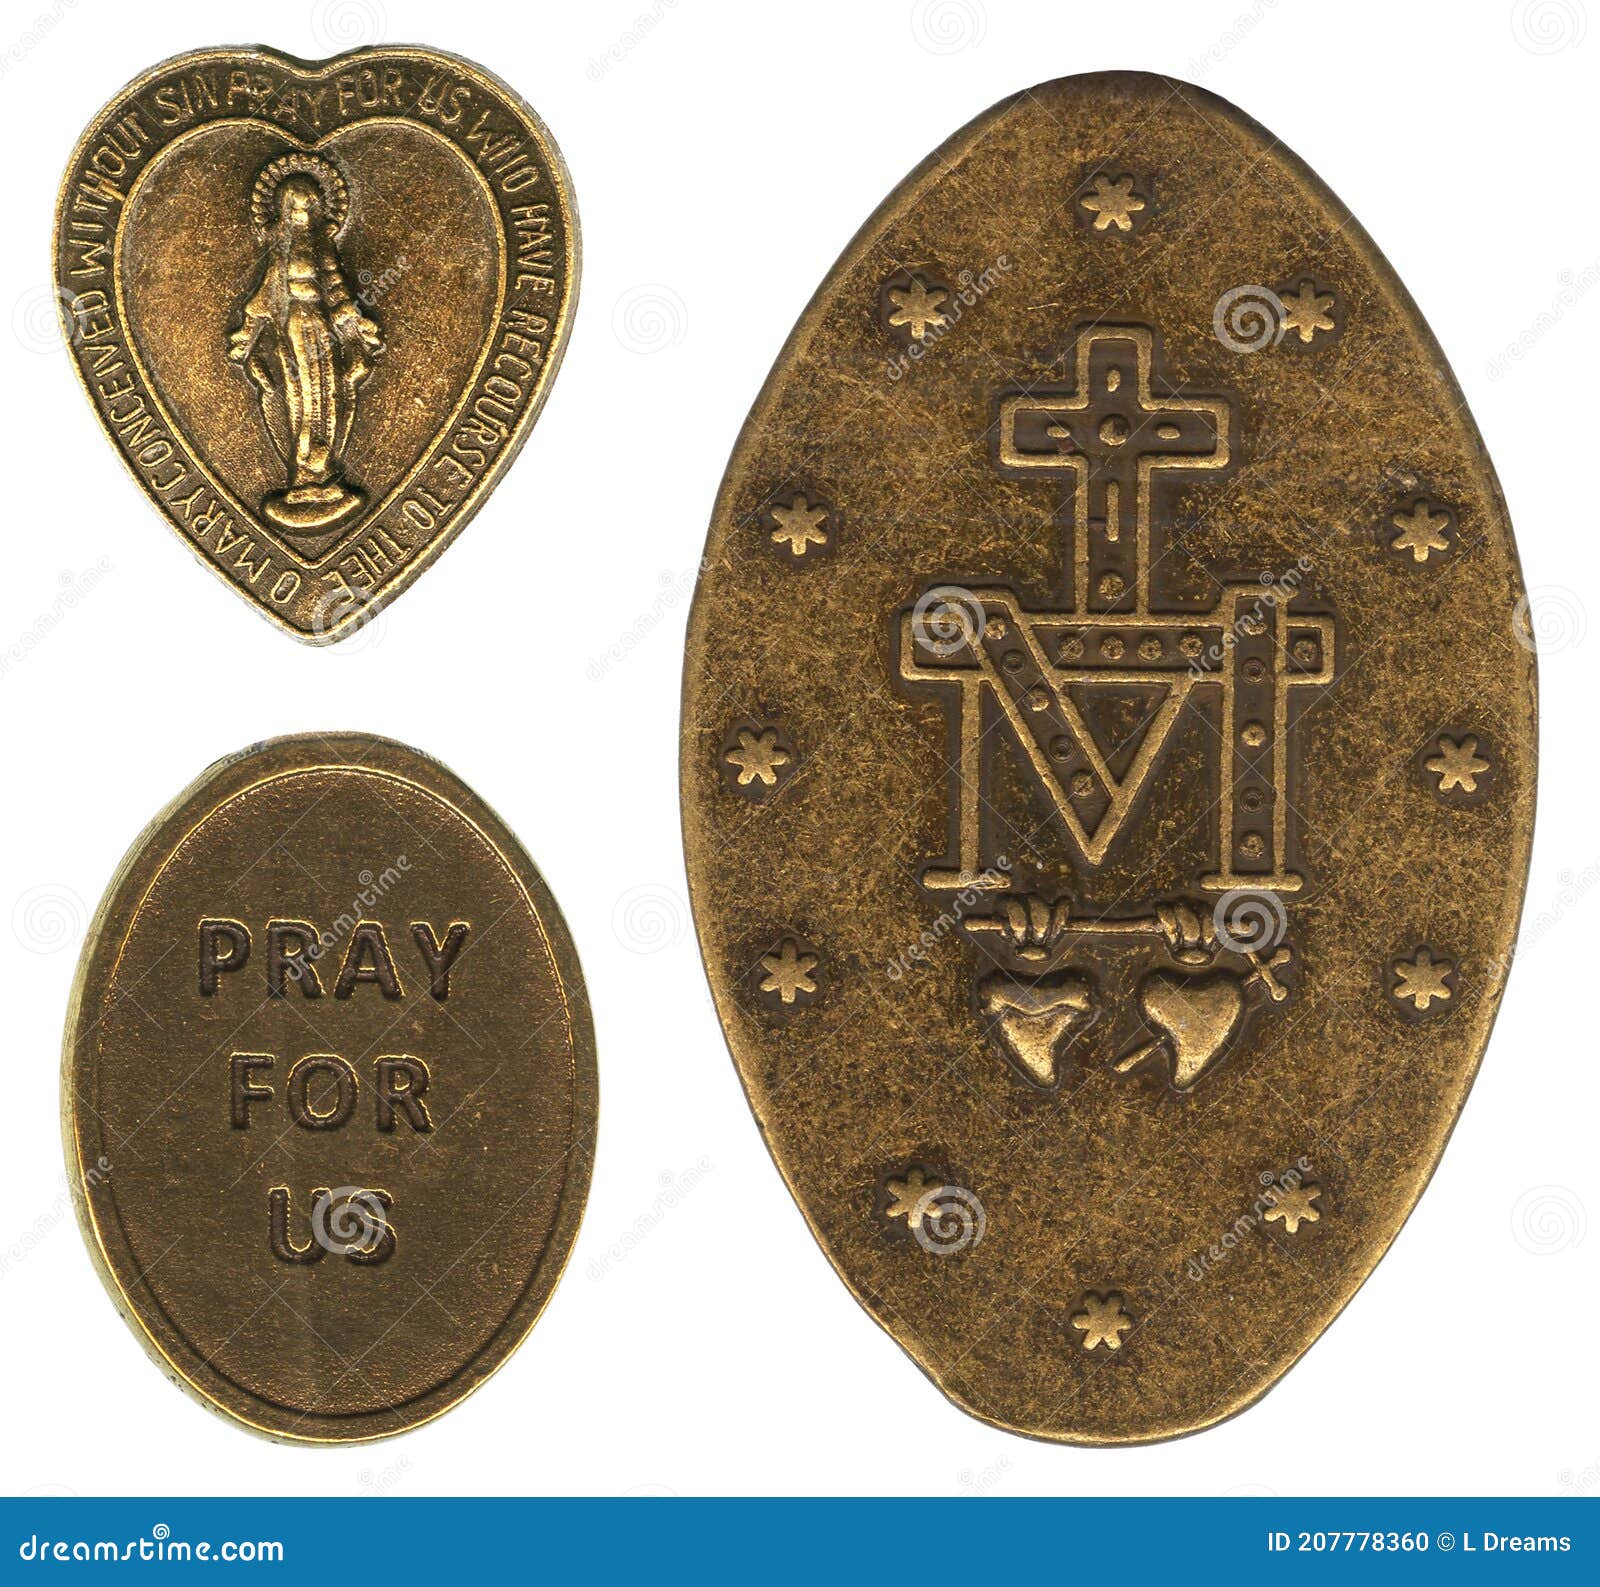 miraculous christian antique bronze medals of mary